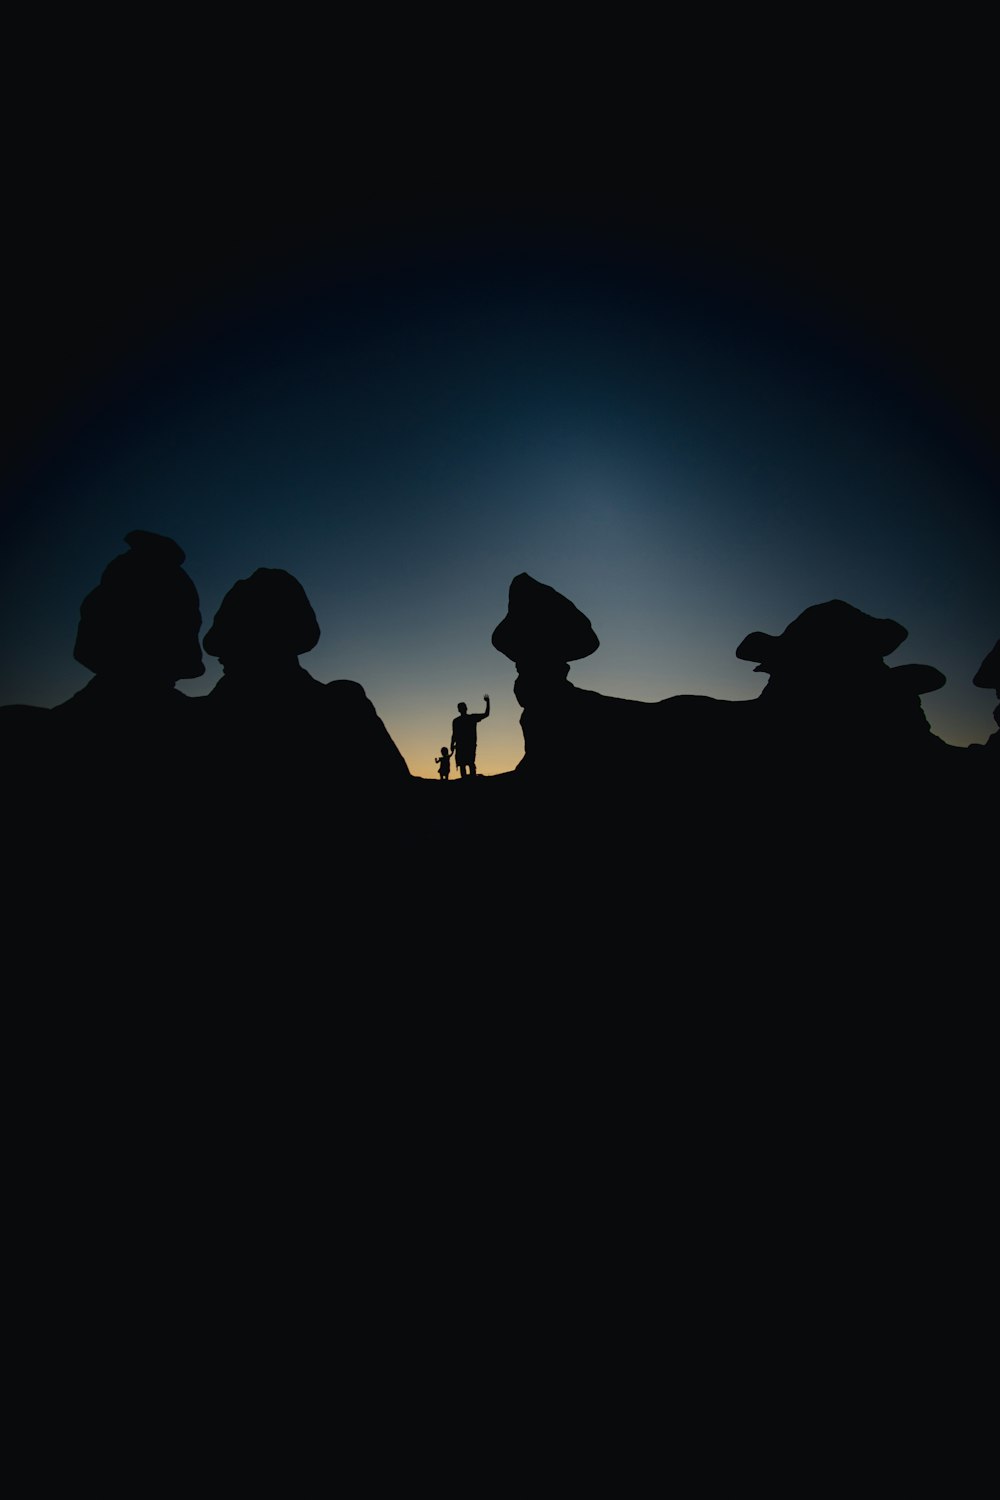 silhouette of people standing on hill during night time